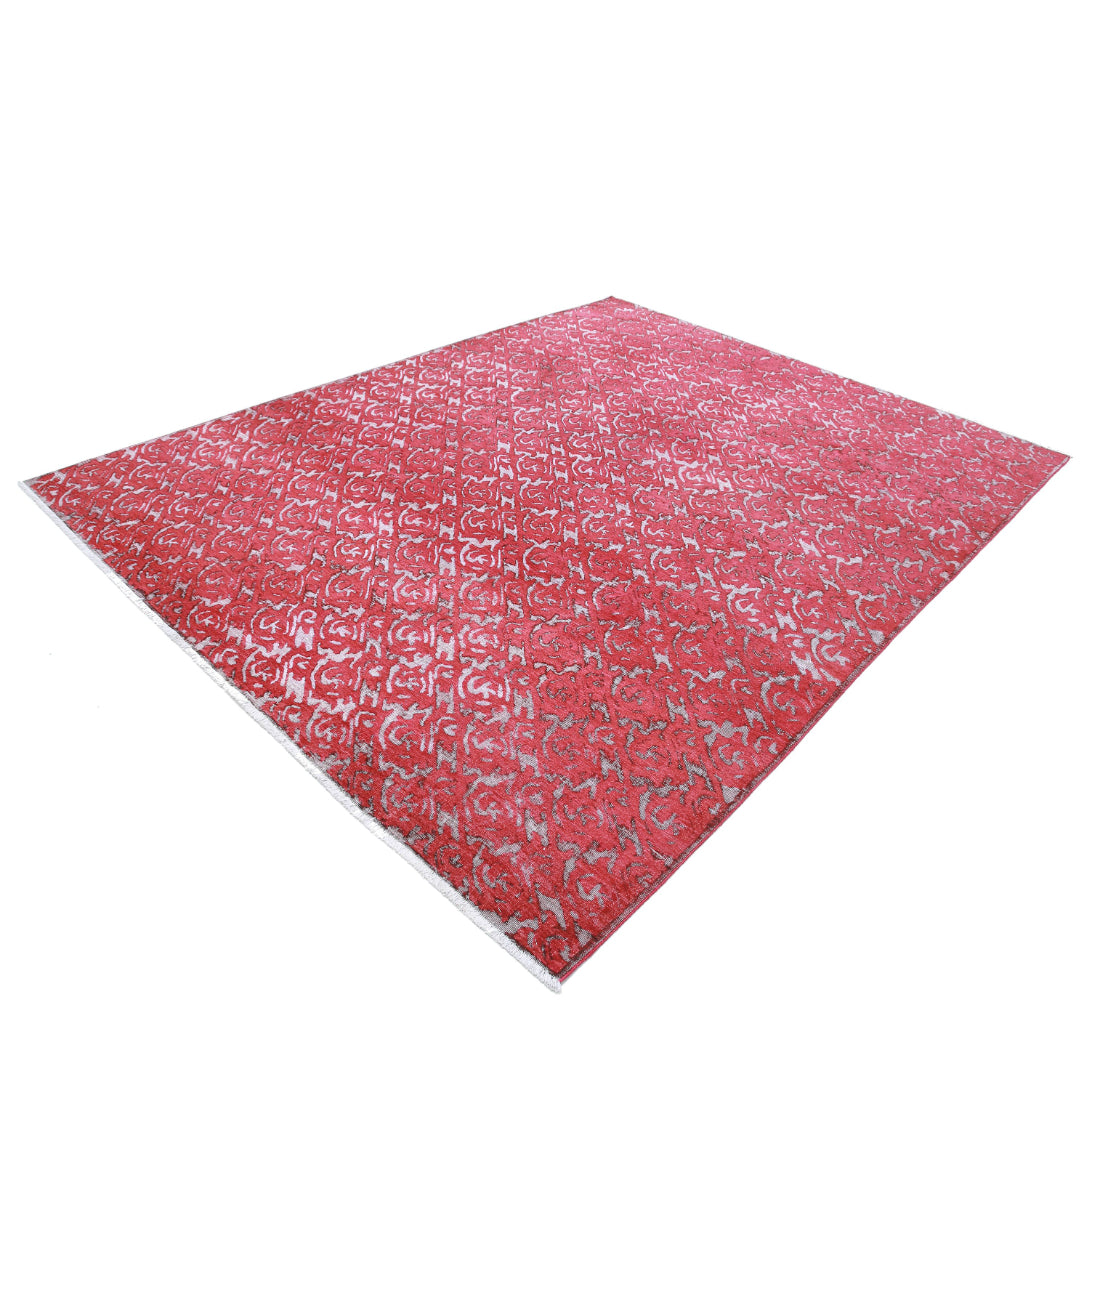 Hand Knotted Onyx Wool Rug - 7'9'' x 9'10'' 7'9'' x 9'10'' (233 X 295) / Red / Red